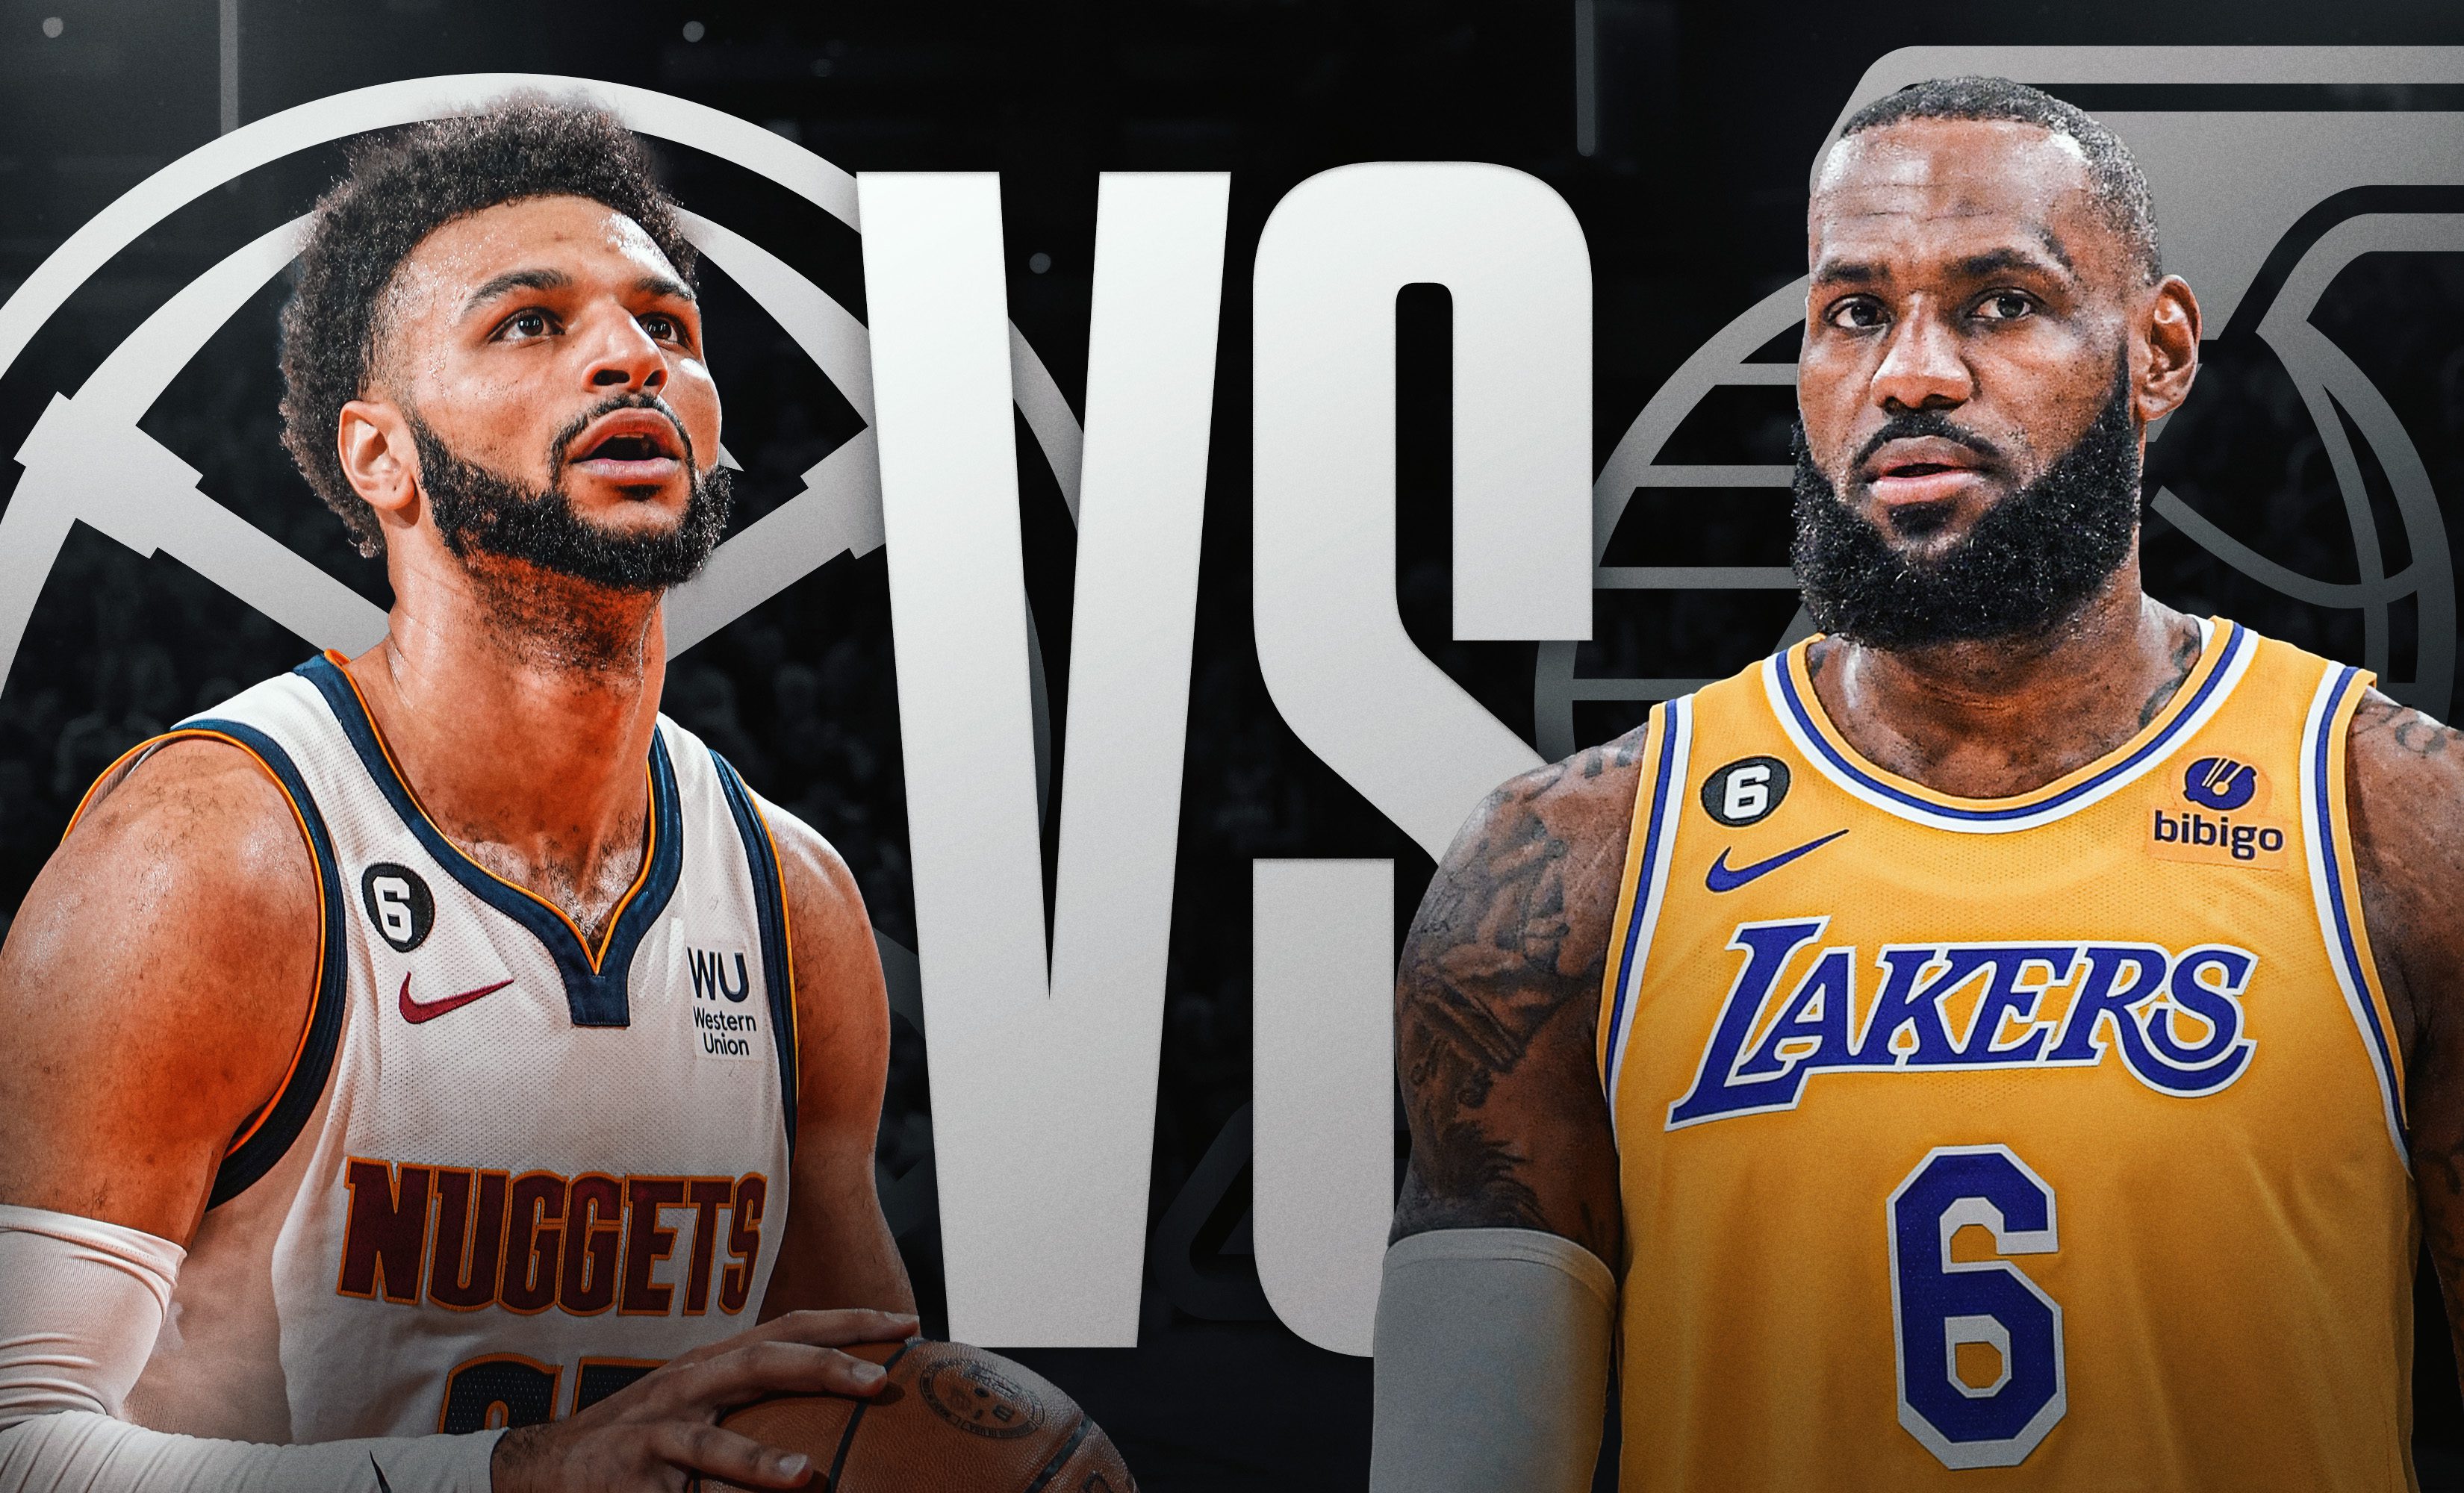 Can The Lakers Avoid Sweep? Lakers vs. Nuggets Game 4 Playoffs Preview, Odds & Predictions